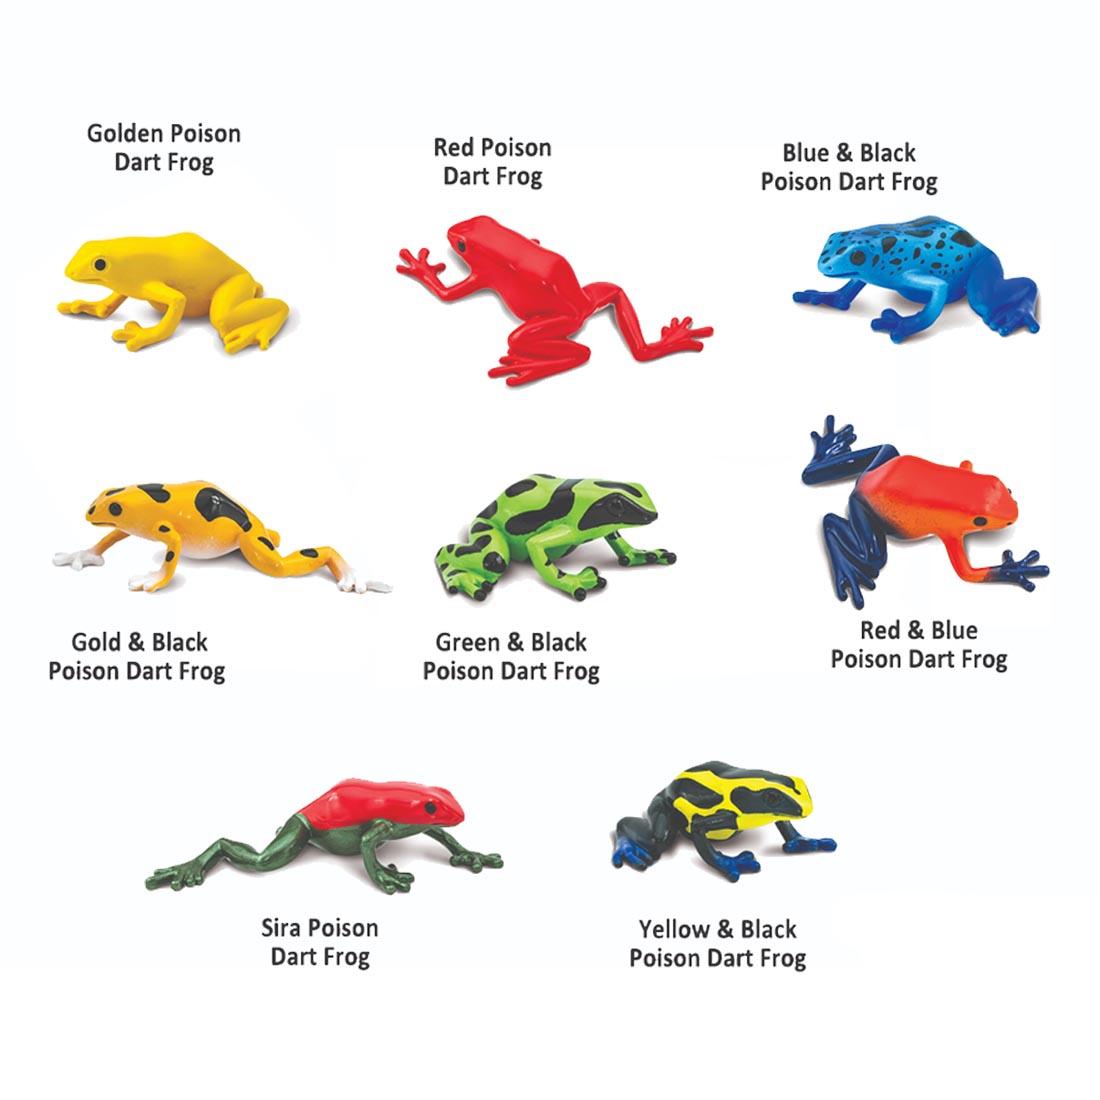 8 Poison Dart Frogs from the Toob Figurine Set labeled with their names: Golden, Red, Blue & Black, Gold & Black, Green & Black, Red & Blue, Sira and Yellow & Black